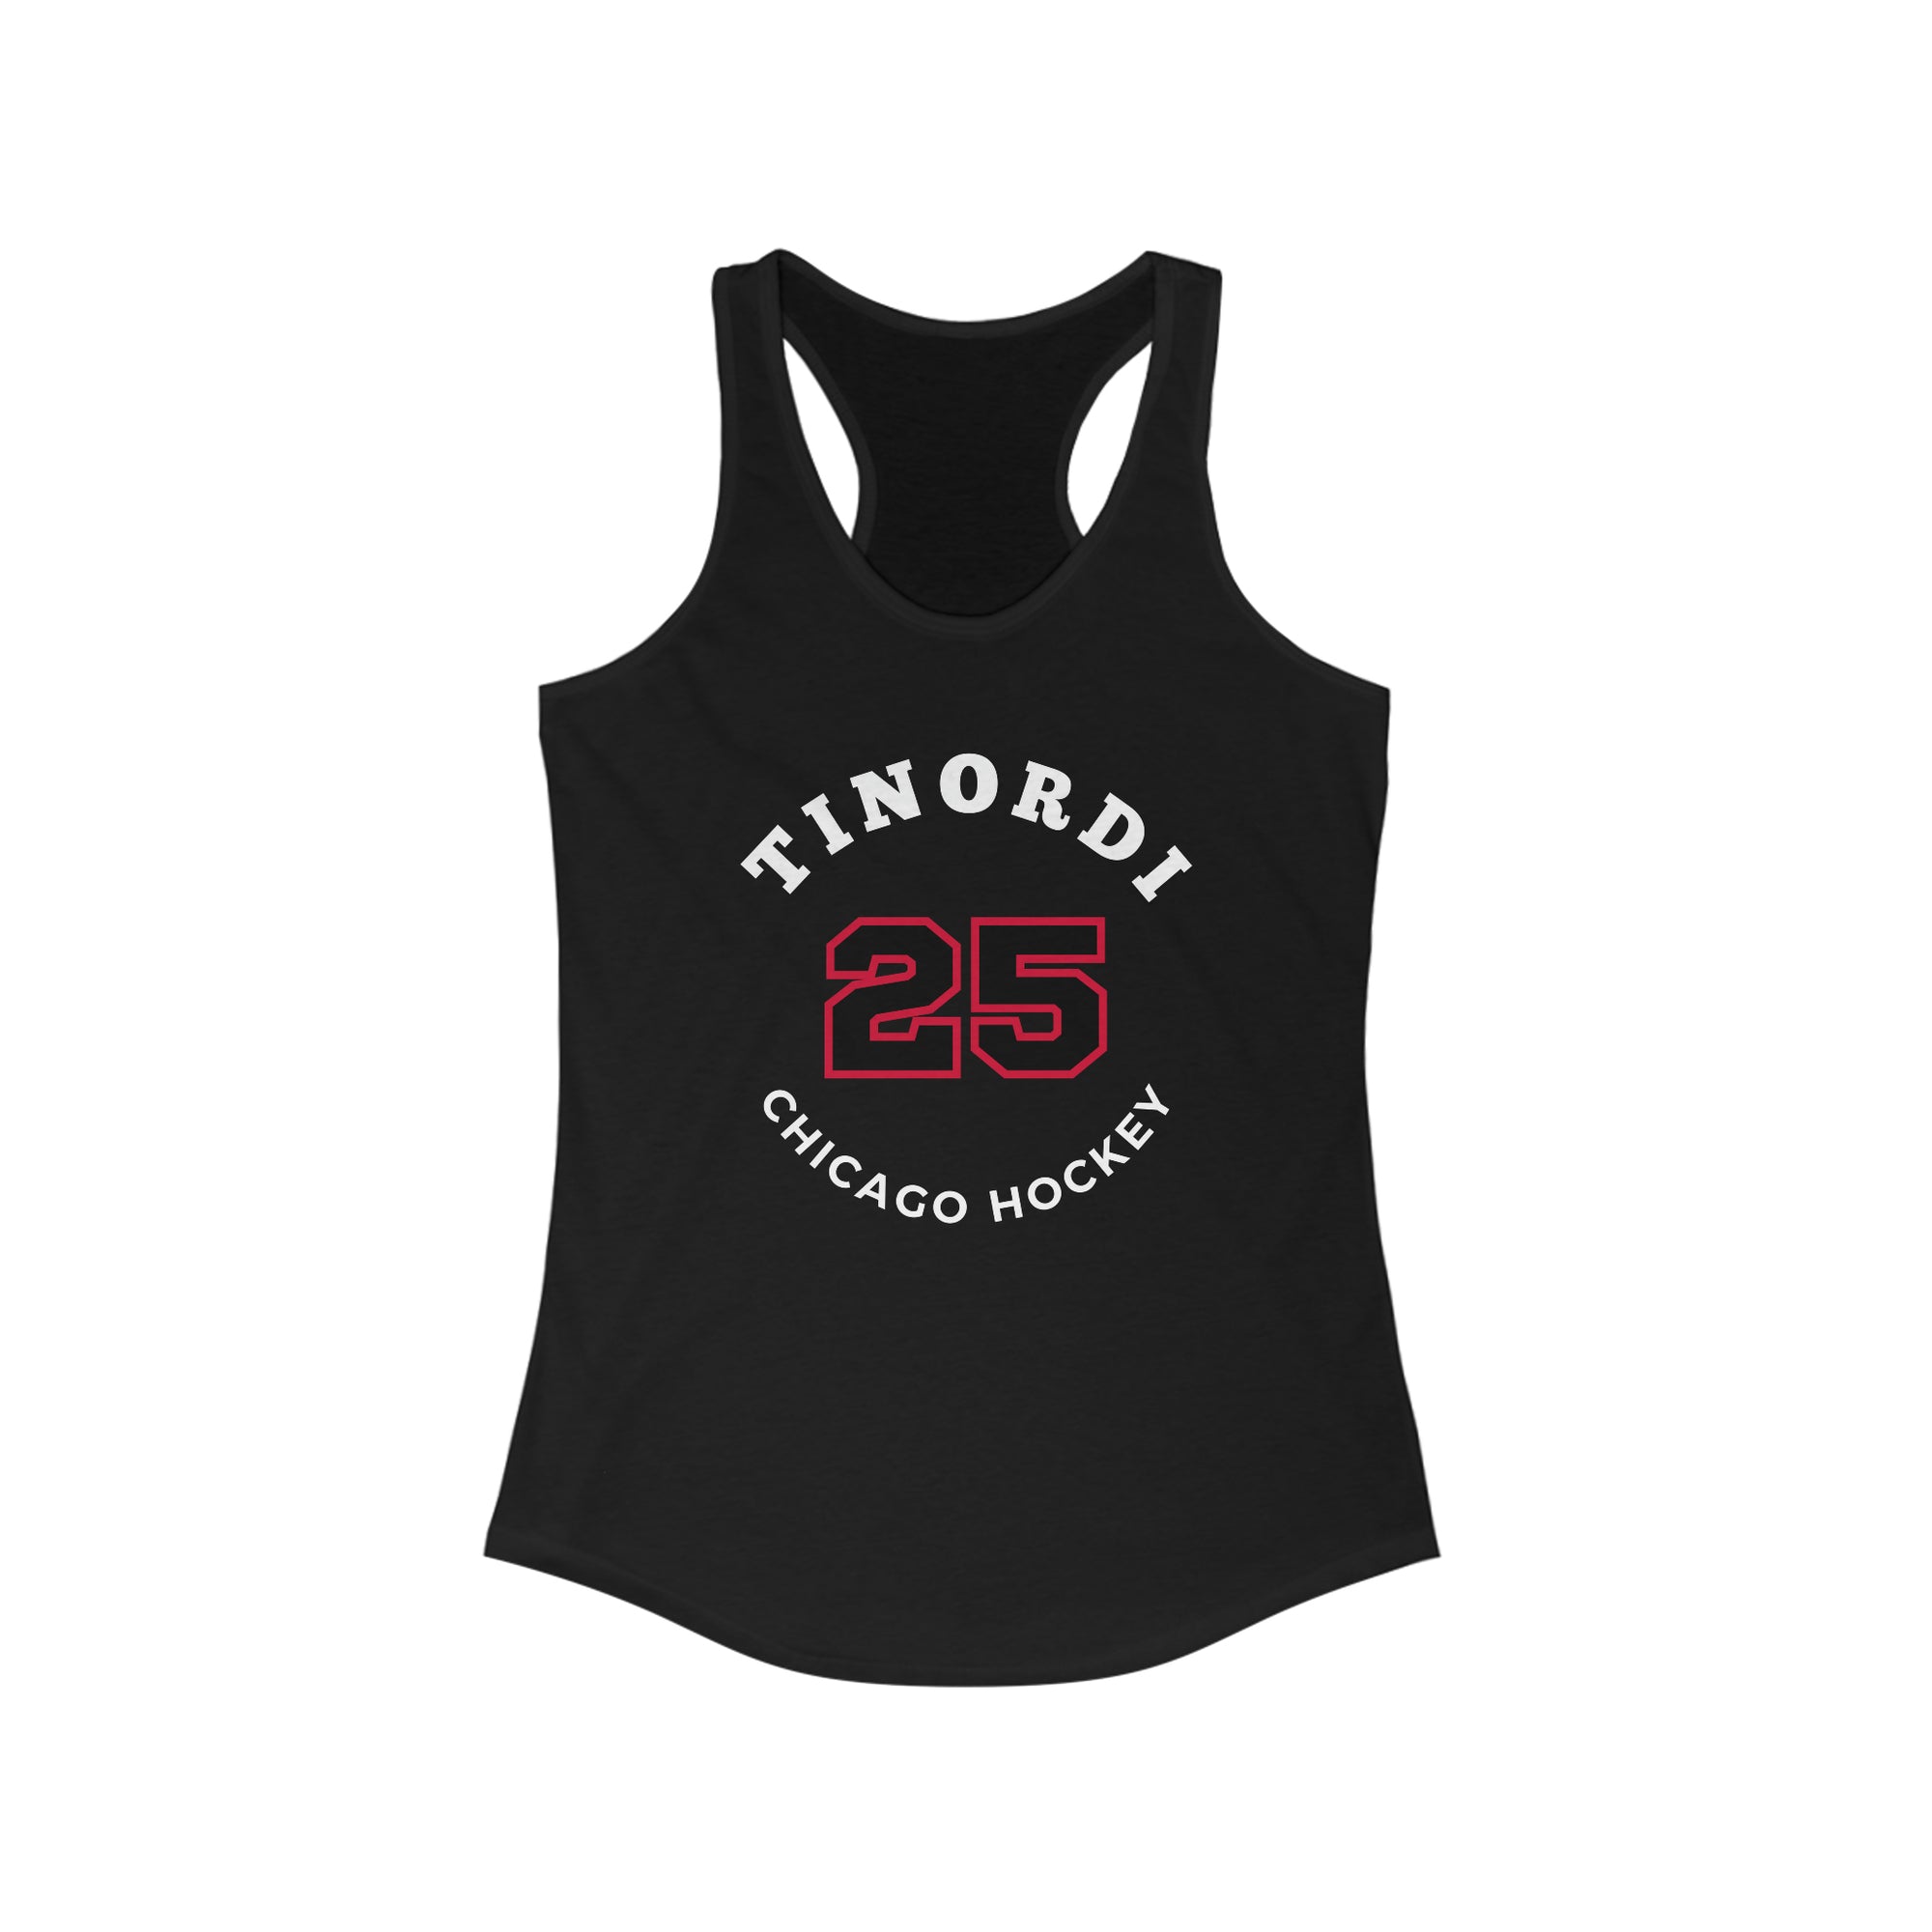 Tinordi 25 Chicago Hockey Number Arch Design Women's Ideal Racerback Tank Top